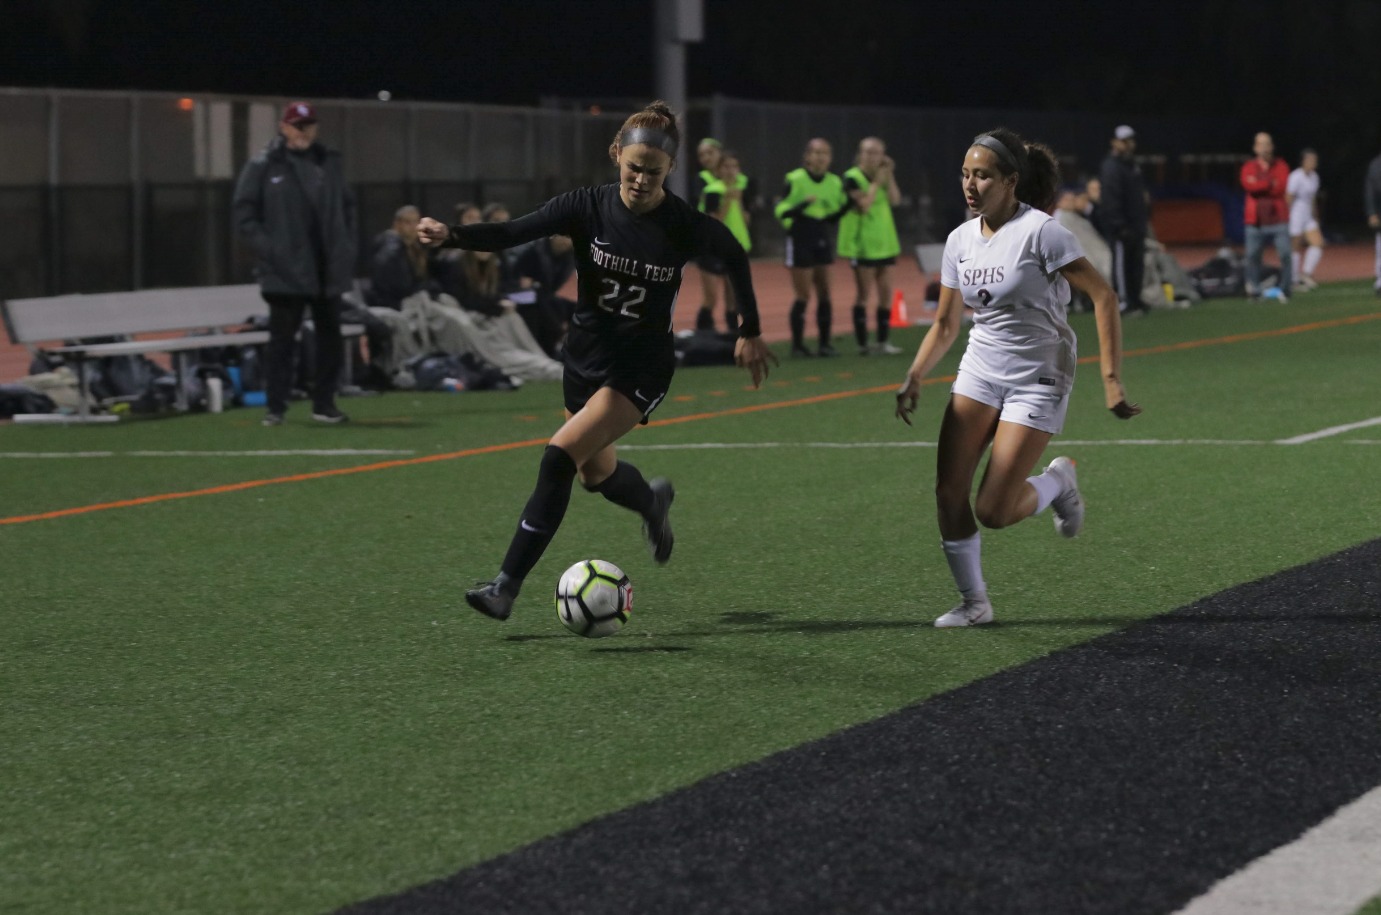 Grace Combs '20 sprinting down the field with the ball. Credit: Olivia Sanford / The Foothill Dragon Press